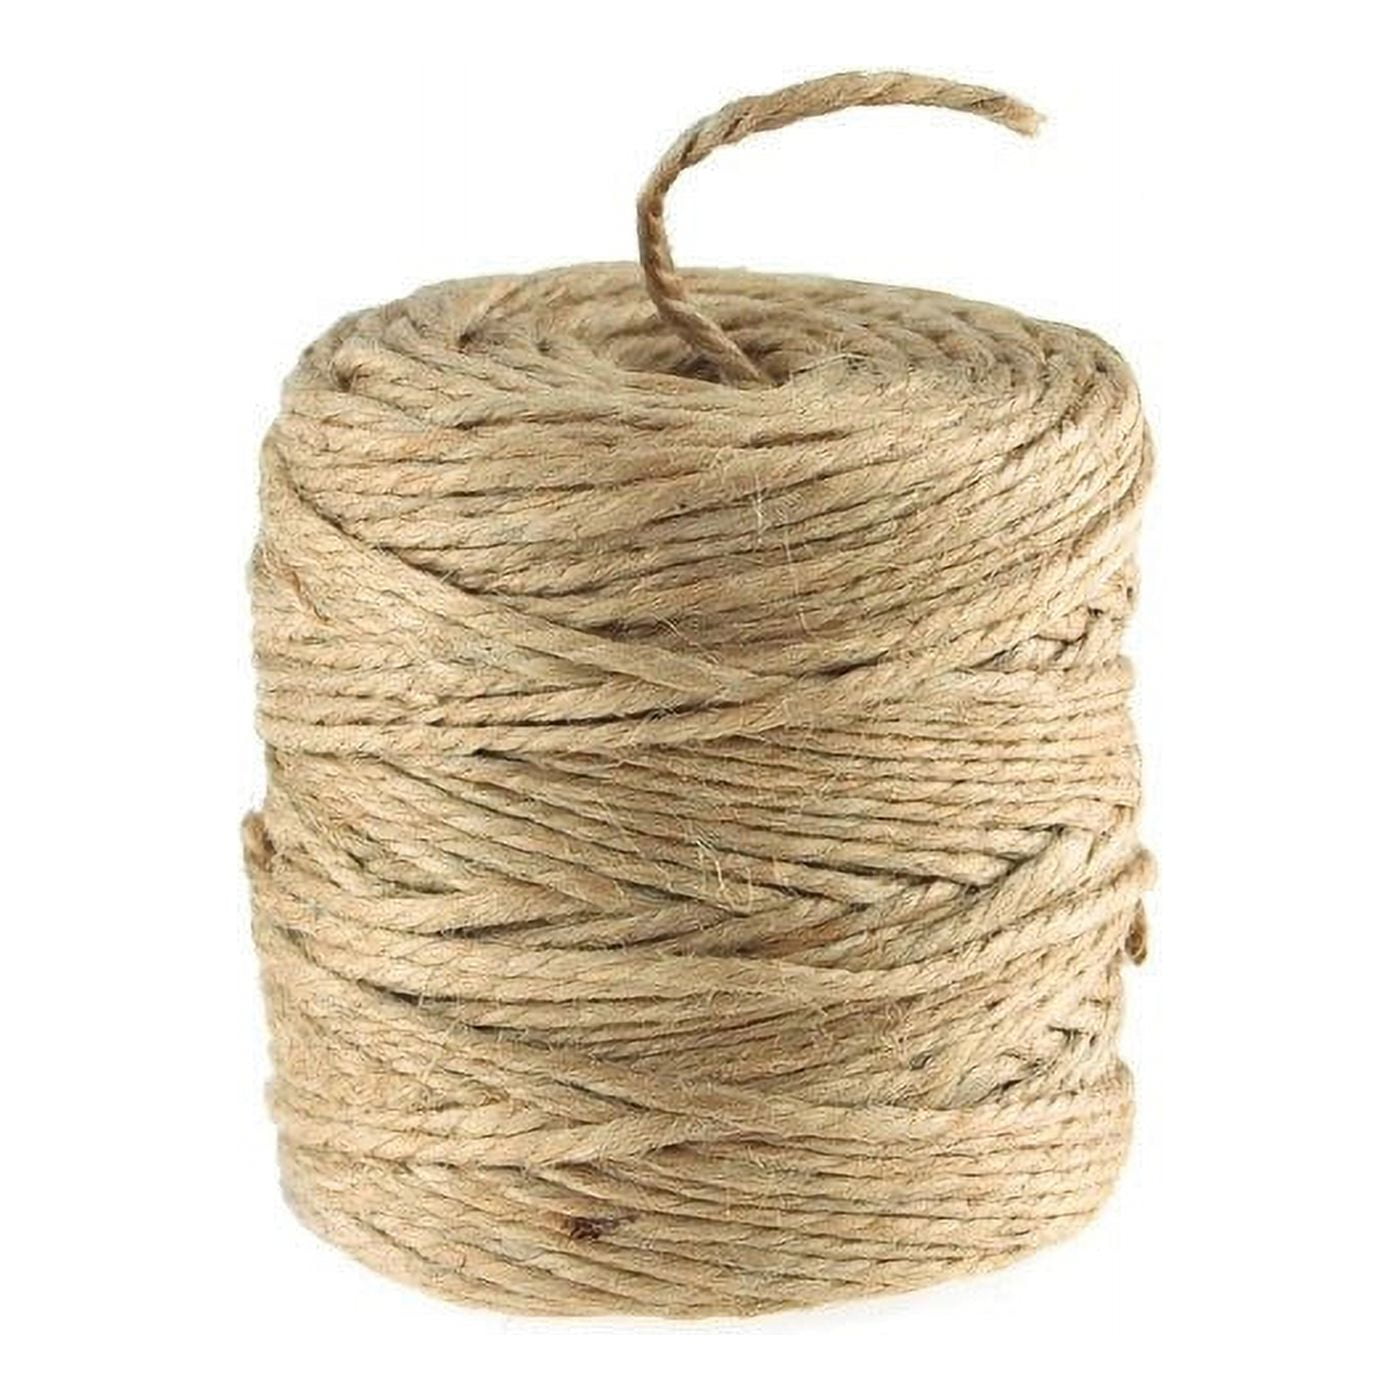 Rustic Pink Jute Twine - 2mm - 3 Ply Premium Strong Natural Twine - 50 100  Yards